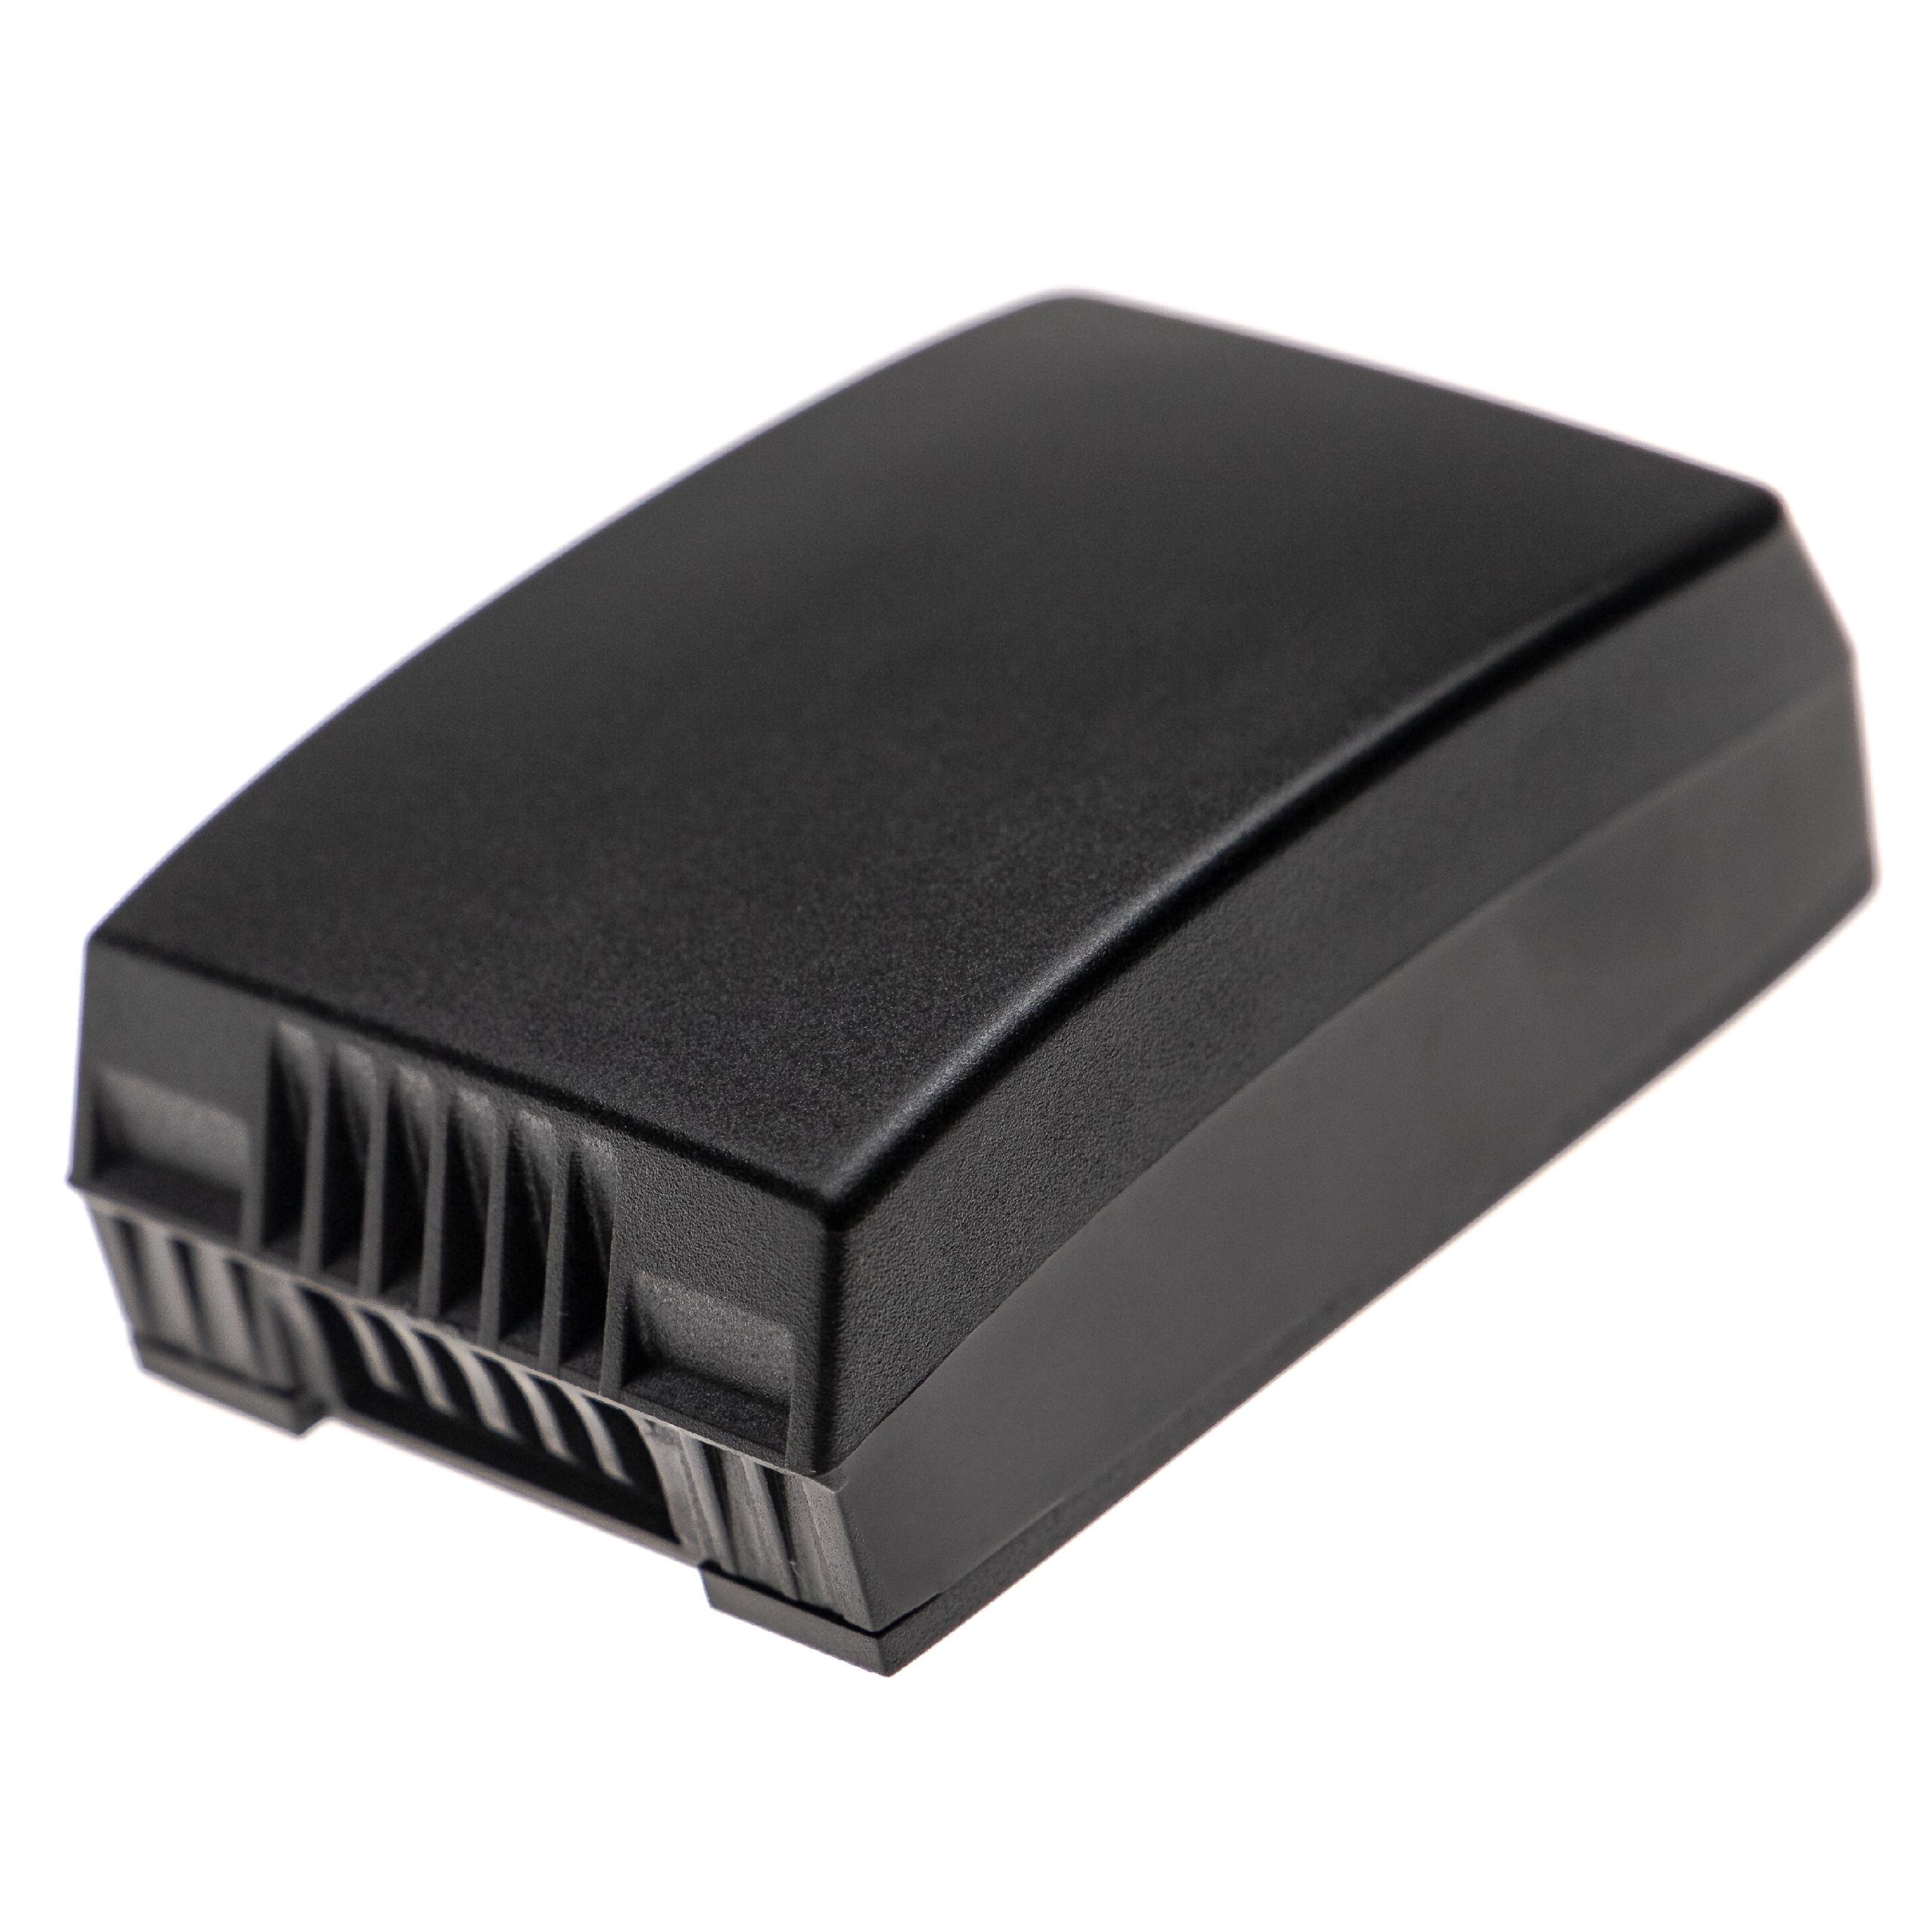 Radio Battery Replacement for VoCollect CWI26591, 730021, 730025, BT-602-1 - 2600mAh 7.4V Li-Ion